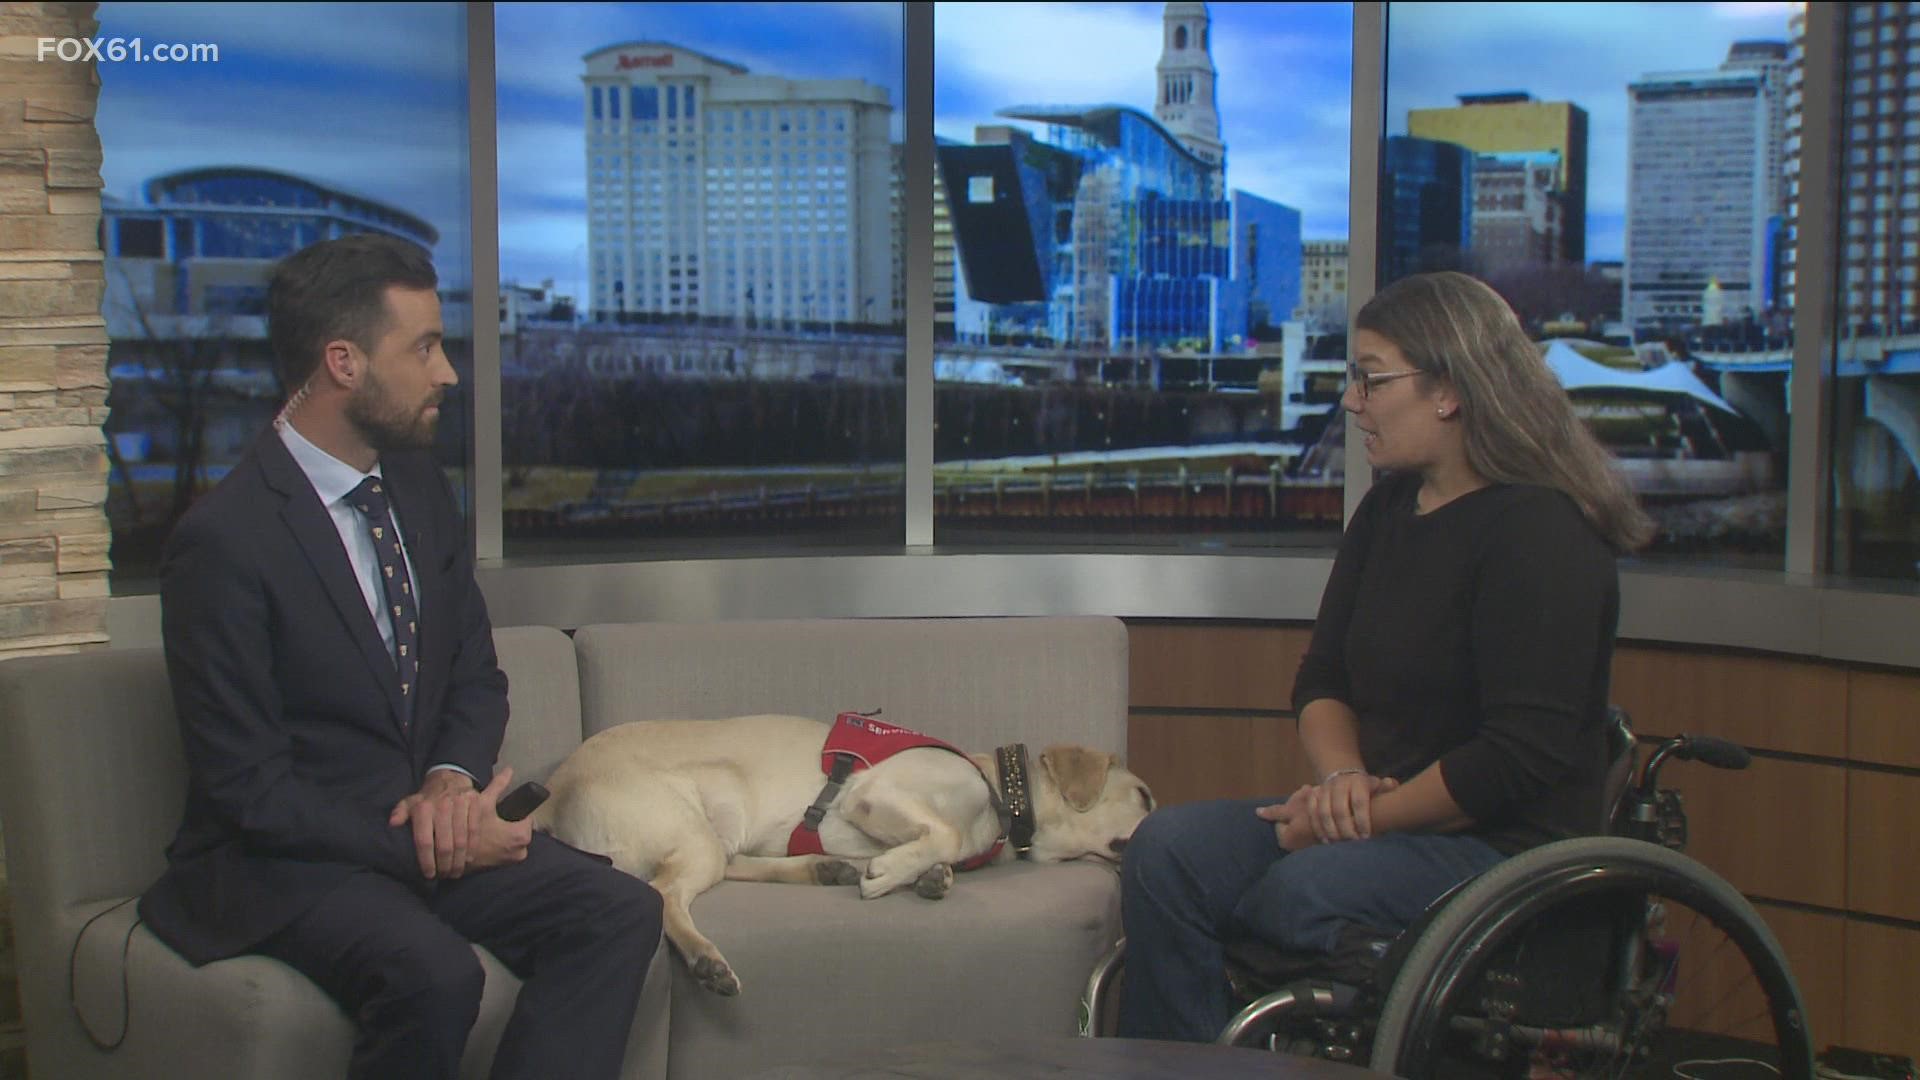 Katelynn Steinke shares how her service dog Jones helps her in her everyday life. FOX61/TEGNA are sponsoring a NEADS puppy, a service dog in training.